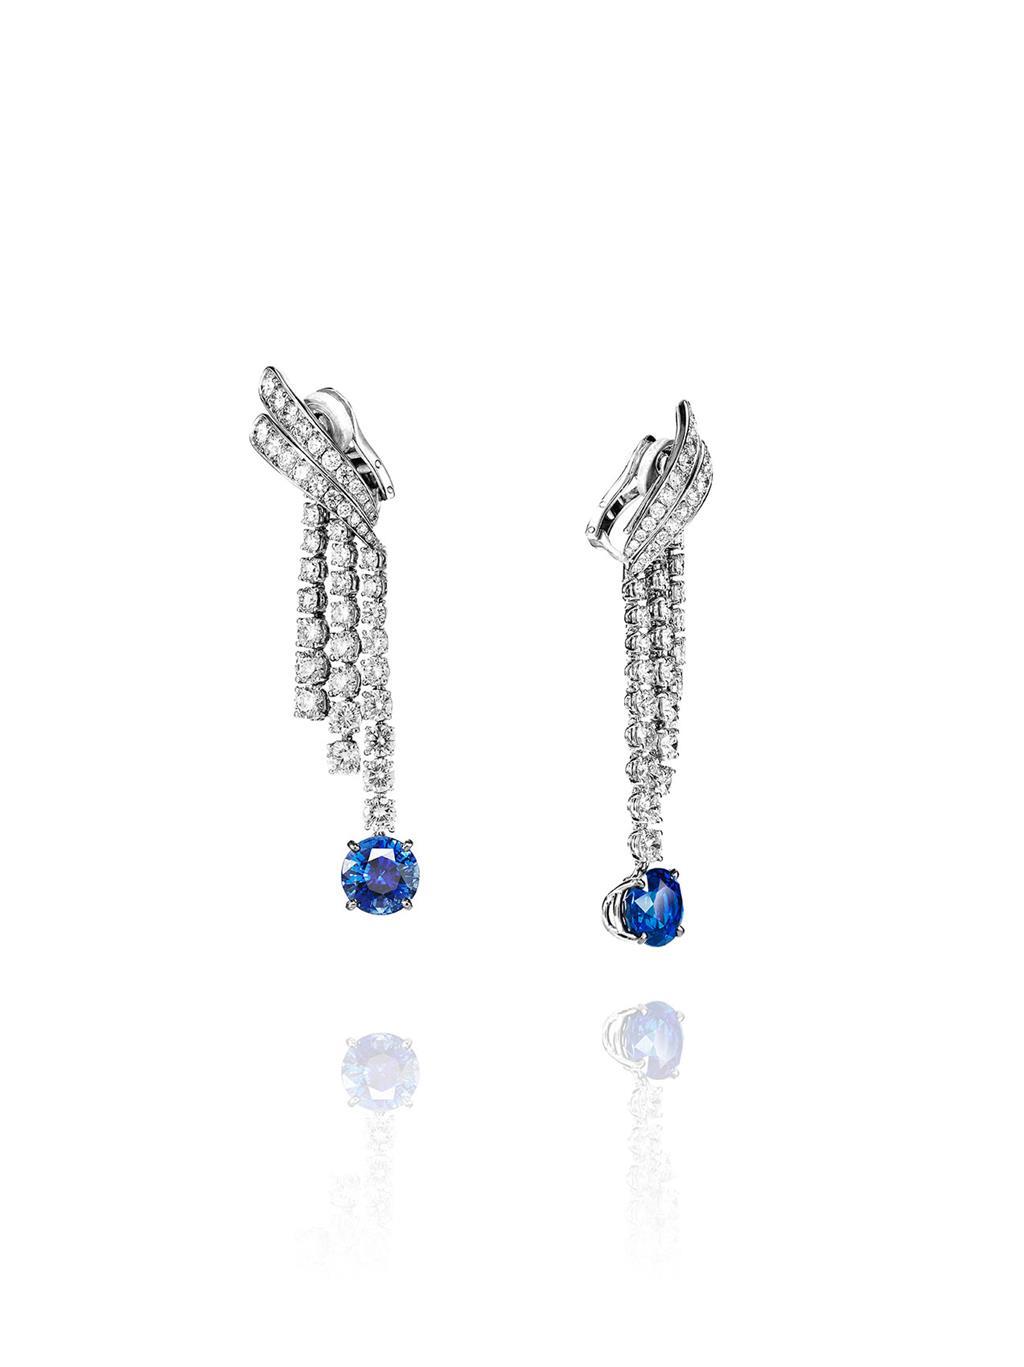 Earrings "L'Été" - White gold set with 2 sapphires and 94 diamonds